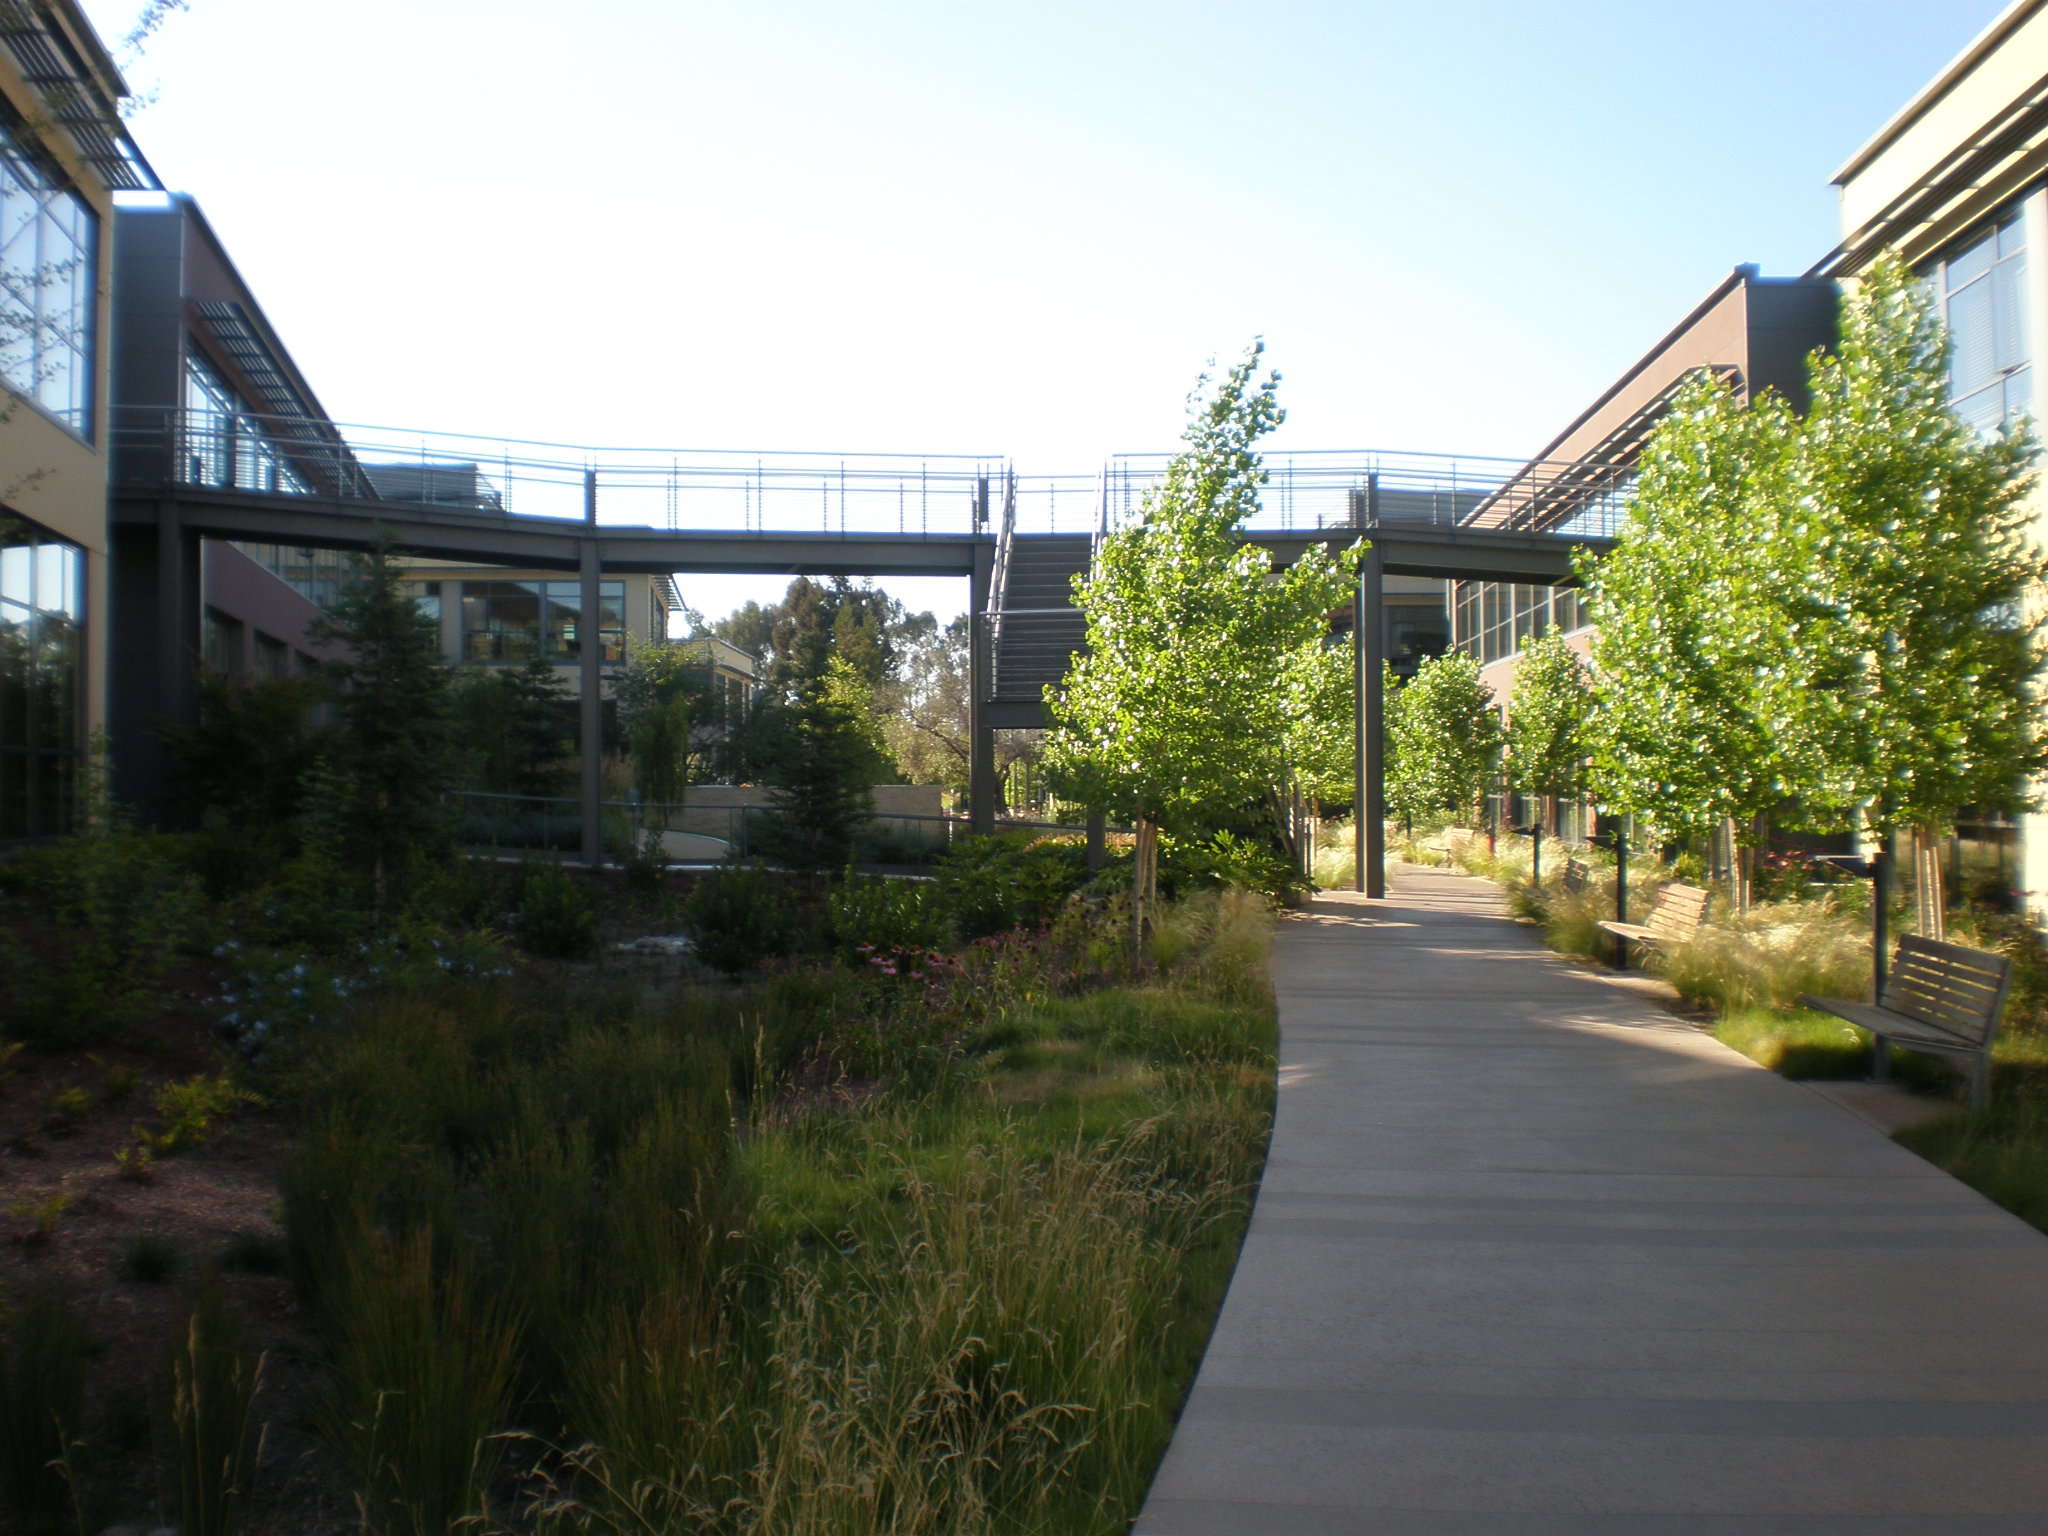 Palo Alto campus is an inviting 29-acre suburban site that features scenic tree-lined paths and modern, open buildings